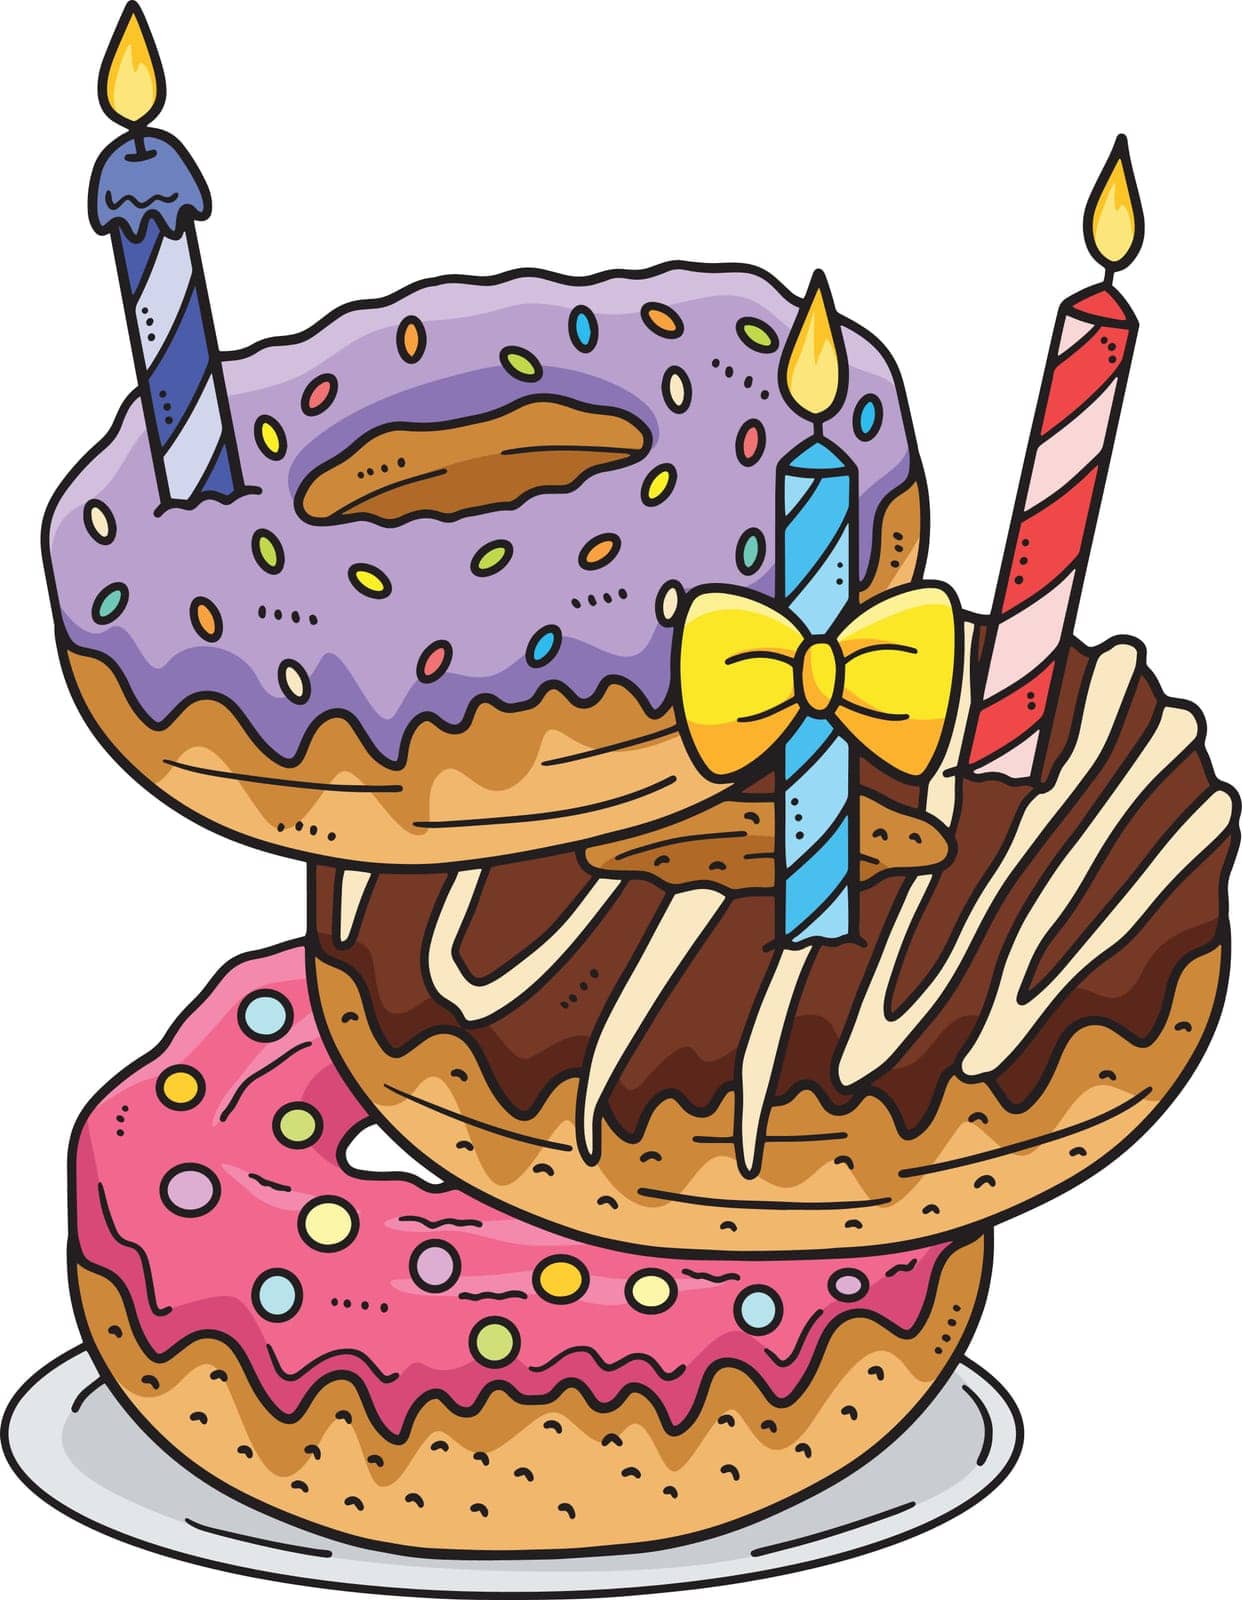 This cartoon clipart shows a Birthday Stack of Donuts with a Candle and Plate illustration.